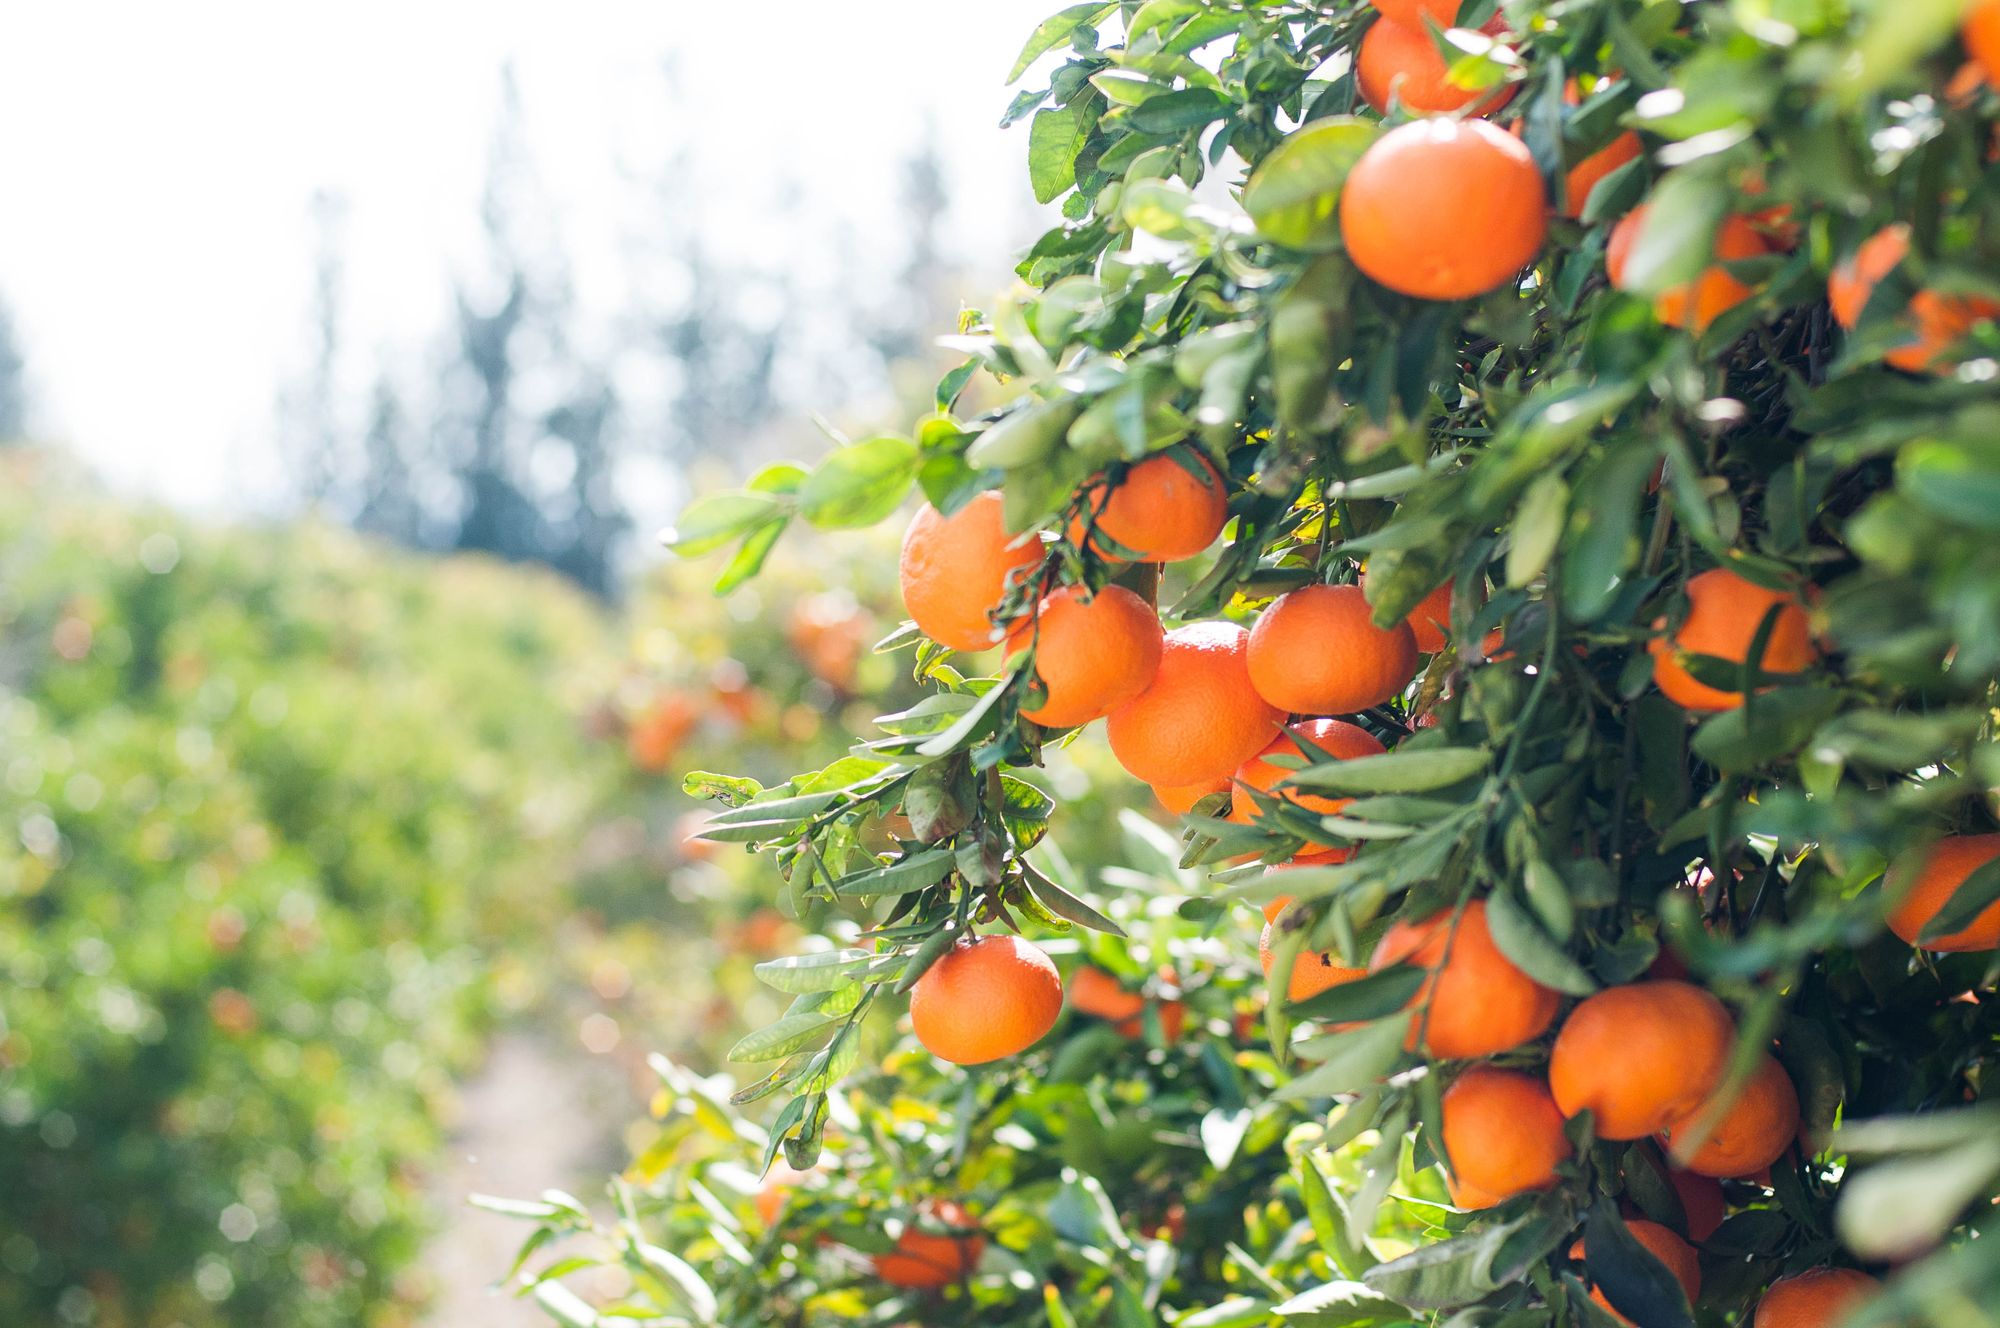 oranges on a fruit tree 10 Benefits of Growing a Backyard Fruit Tree Orchard